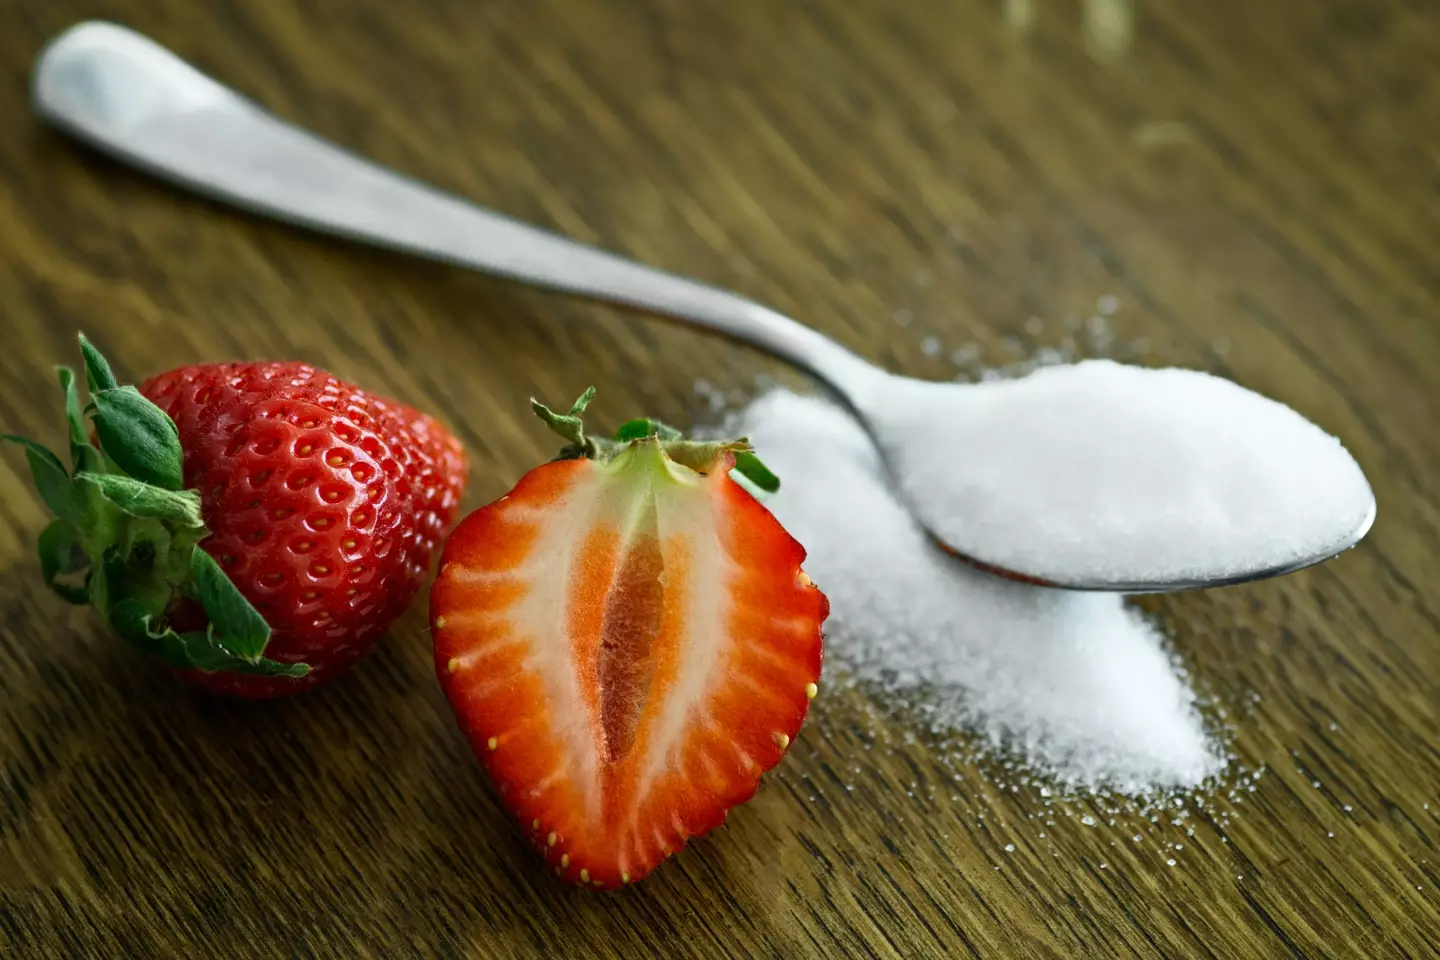 A ruling says that a sweetener found in 'diet' products is 'possibly carcinogenic'.